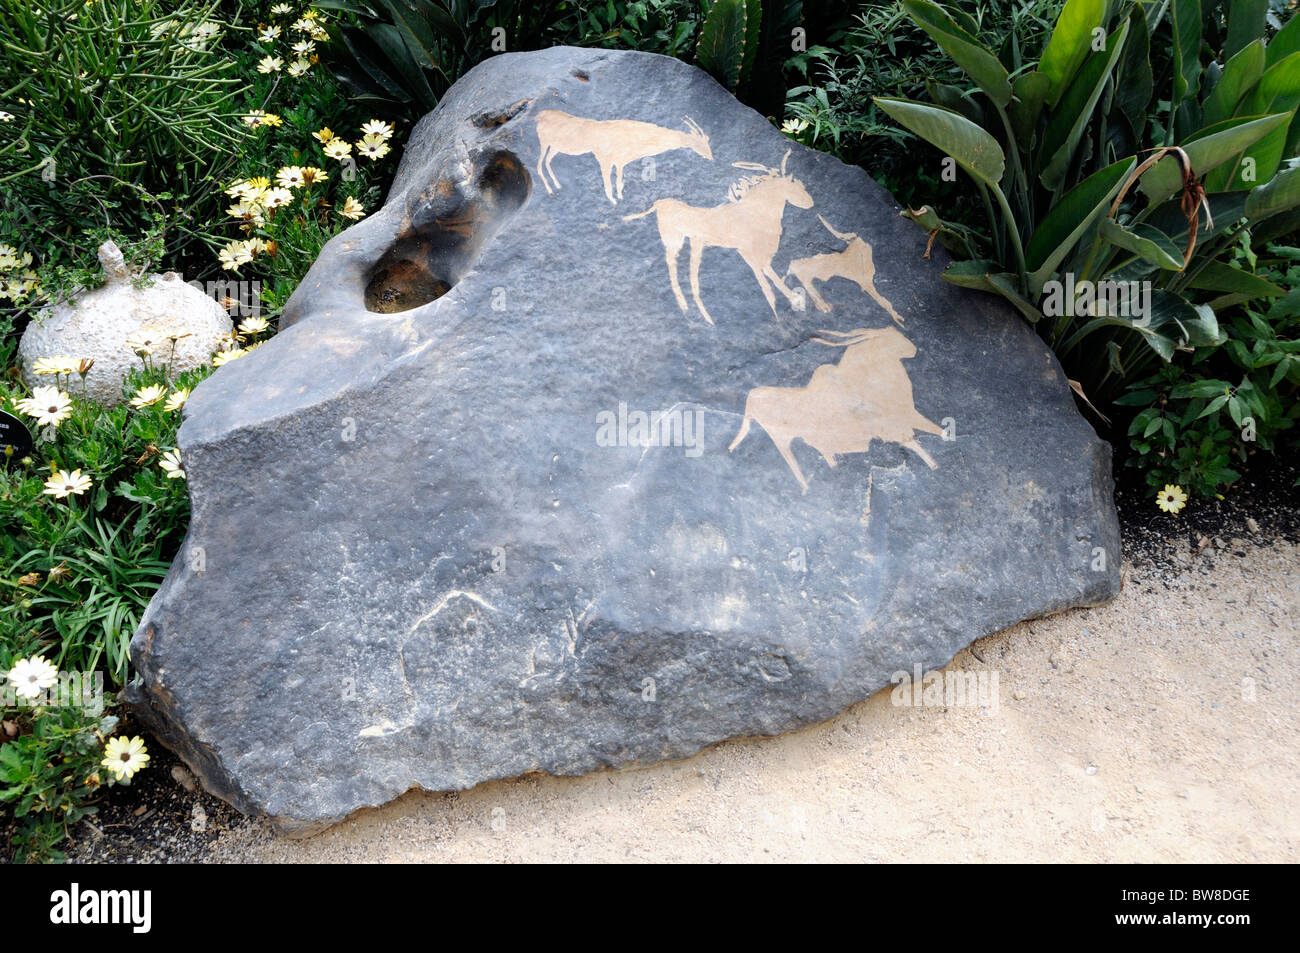 African Rock Art displayed in the garden outside the British Museum London England UK Stock Photo